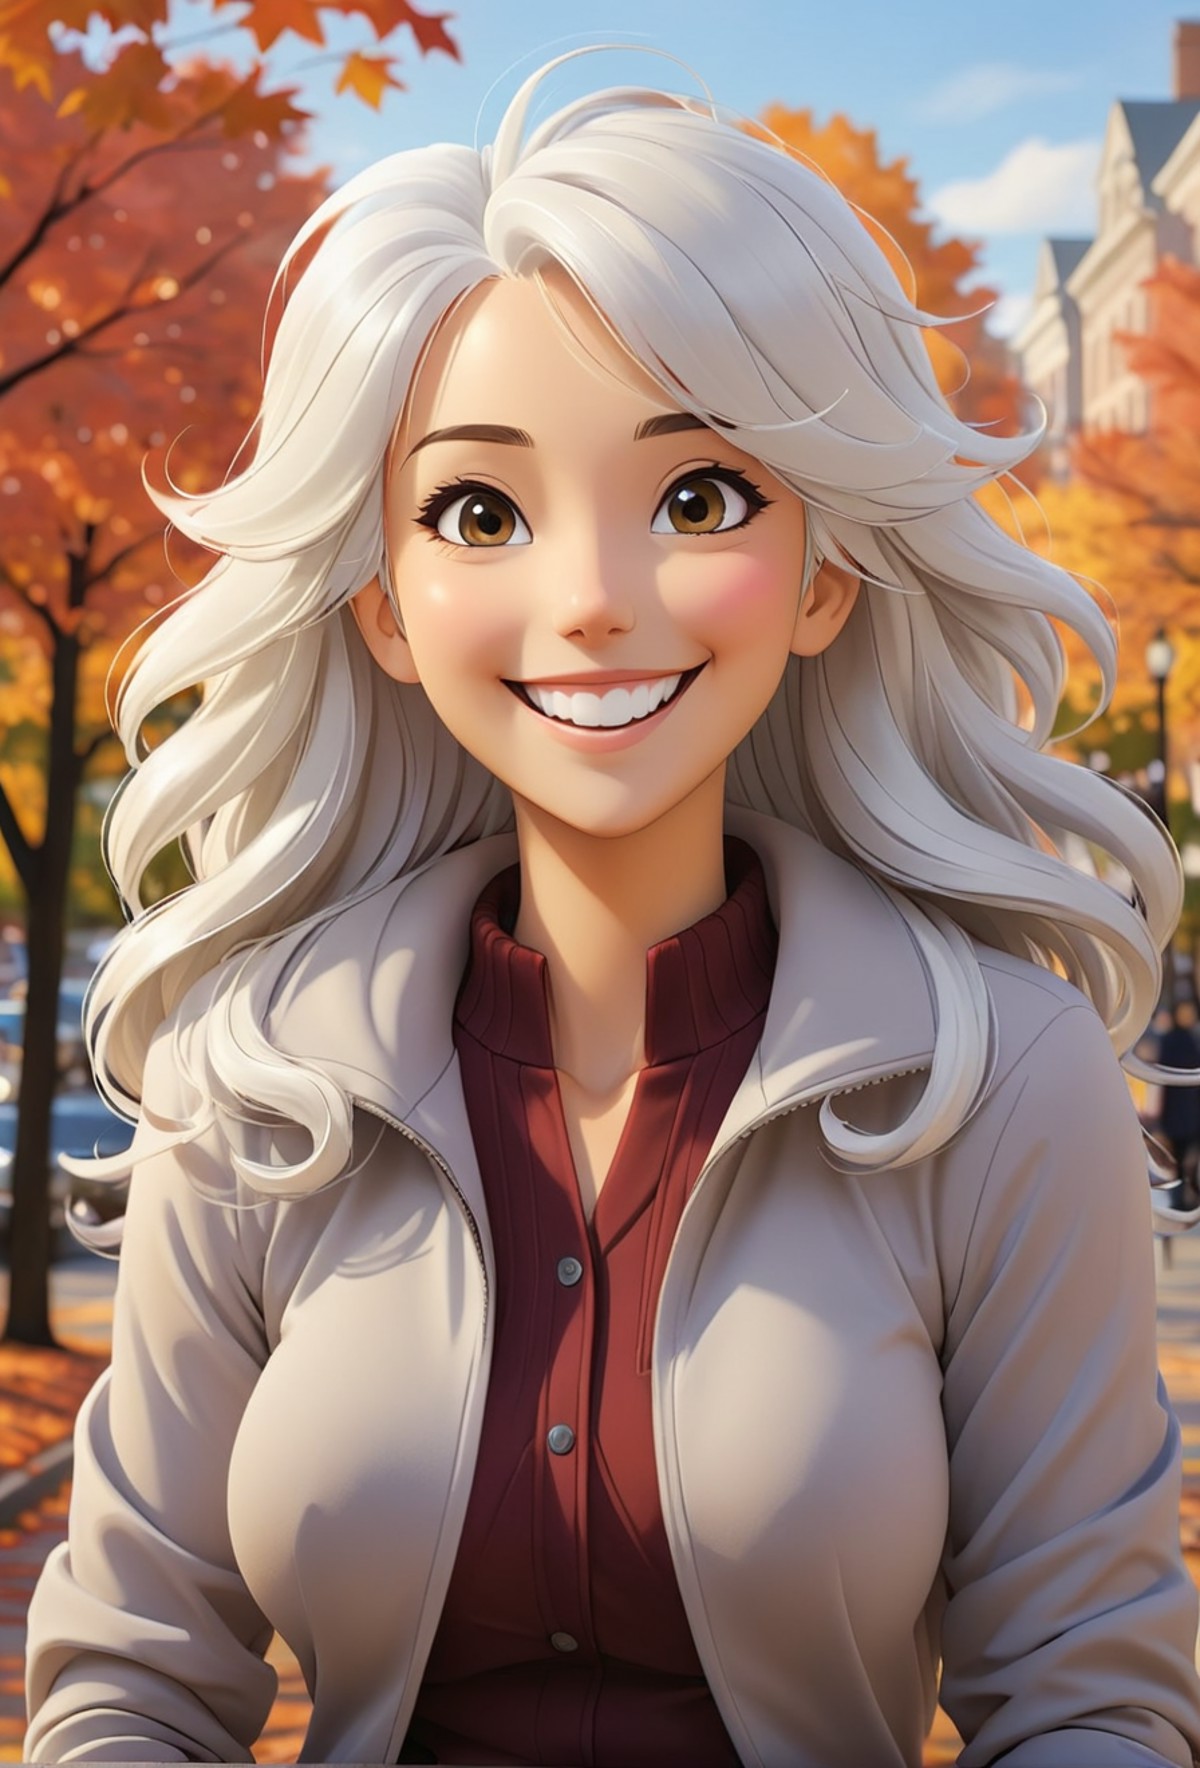 (anime niji illustration :1.3), extremely content happy smile, A fit white haired woman in Alexandria, Virginia in autumn ...